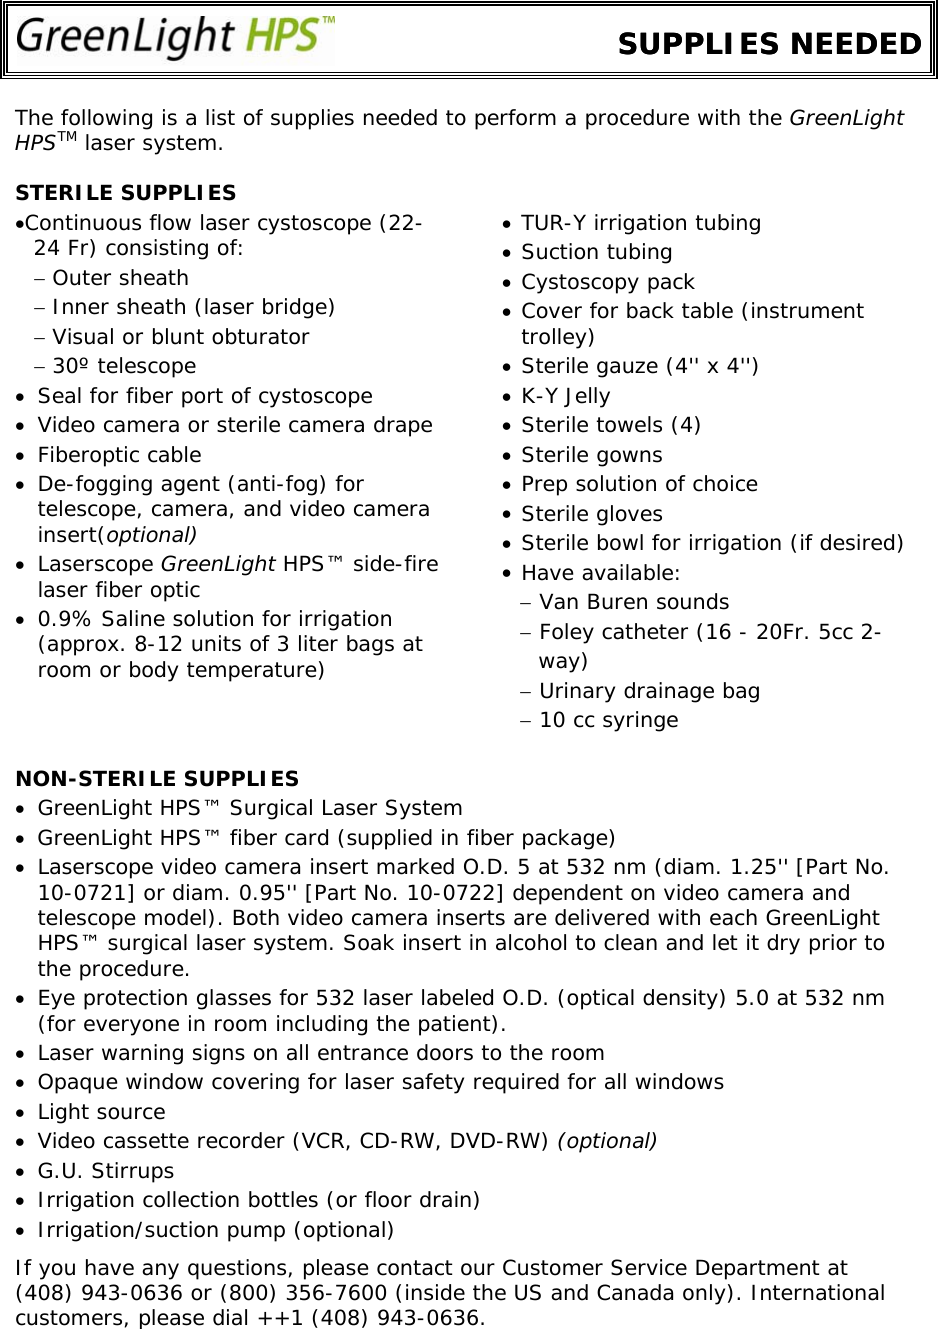         SUPPLIES NEEDEDSUPPLIES NEEDED The following is a list of supplies needed to perform a procedure with the GreenLight HPSTM laser system.  STERILE SUPPLIES • • • • • • • • • • • • • Continuous flow laser cystoscope (22-24 Fr) consisting of:  TUR-Y irrigation tubing Suction tubing − Outer sheath  Cystoscopy pack − Inner sheath (laser bridge)  Cover for back table (instrument trolley) − Visual or blunt obturator − 30º telescope  Sterile gauze (4&apos;&apos; x 4&apos;&apos;) • Seal for fiber port of cystoscope  K-Y Jelly • Video camera or sterile camera drape  Sterile towels (4) • Fiberoptic cable   Sterile gowns • De-fogging agent (anti-fog) for telescope, camera, and video camera insert(optional) Prep solution of choice Sterile gloves Sterile bowl for irrigation (if desired) • Laserscope GreenLight HPS™ side-fire laser fiber optic   Have available: − Van Buren sounds • 0.9% Saline solution for irrigation (approx. 8-12 units of 3 liter bags at room or body temperature)  − Foley catheter (16 - 20Fr. 5cc 2-             way) − Urinary drainage bag − 10 cc syringe NON-STERILE SUPPLIES • GreenLight HPS™ Surgical Laser System • GreenLight HPS™ fiber card (supplied in fiber package) • Laserscope video camera insert marked O.D. 5 at 532 nm (diam. 1.25&apos;&apos; [Part No. 10-0721] or diam. 0.95&apos;&apos; [Part No. 10-0722] dependent on video camera and telescope model). Both video camera inserts are delivered with each GreenLight HPS™ surgical laser system. Soak insert in alcohol to clean and let it dry prior to the procedure. • Eye protection glasses for 532 laser labeled O.D. (optical density) 5.0 at 532 nm (for everyone in room including the patient).  • Laser warning signs on all entrance doors to the room • Opaque window covering for laser safety required for all windows • Light source • Video cassette recorder (VCR, CD-RW, DVD-RW) (optional) • G.U. Stirrups • Irrigation collection bottles (or floor drain) • Irrigation/suction pump (optional)  If you have any questions, please contact our Customer Service Department at  (408) 943-0636 or (800) 356-7600 (inside the US and Canada only). International customers, please dial ++1 (408) 943-0636.                         